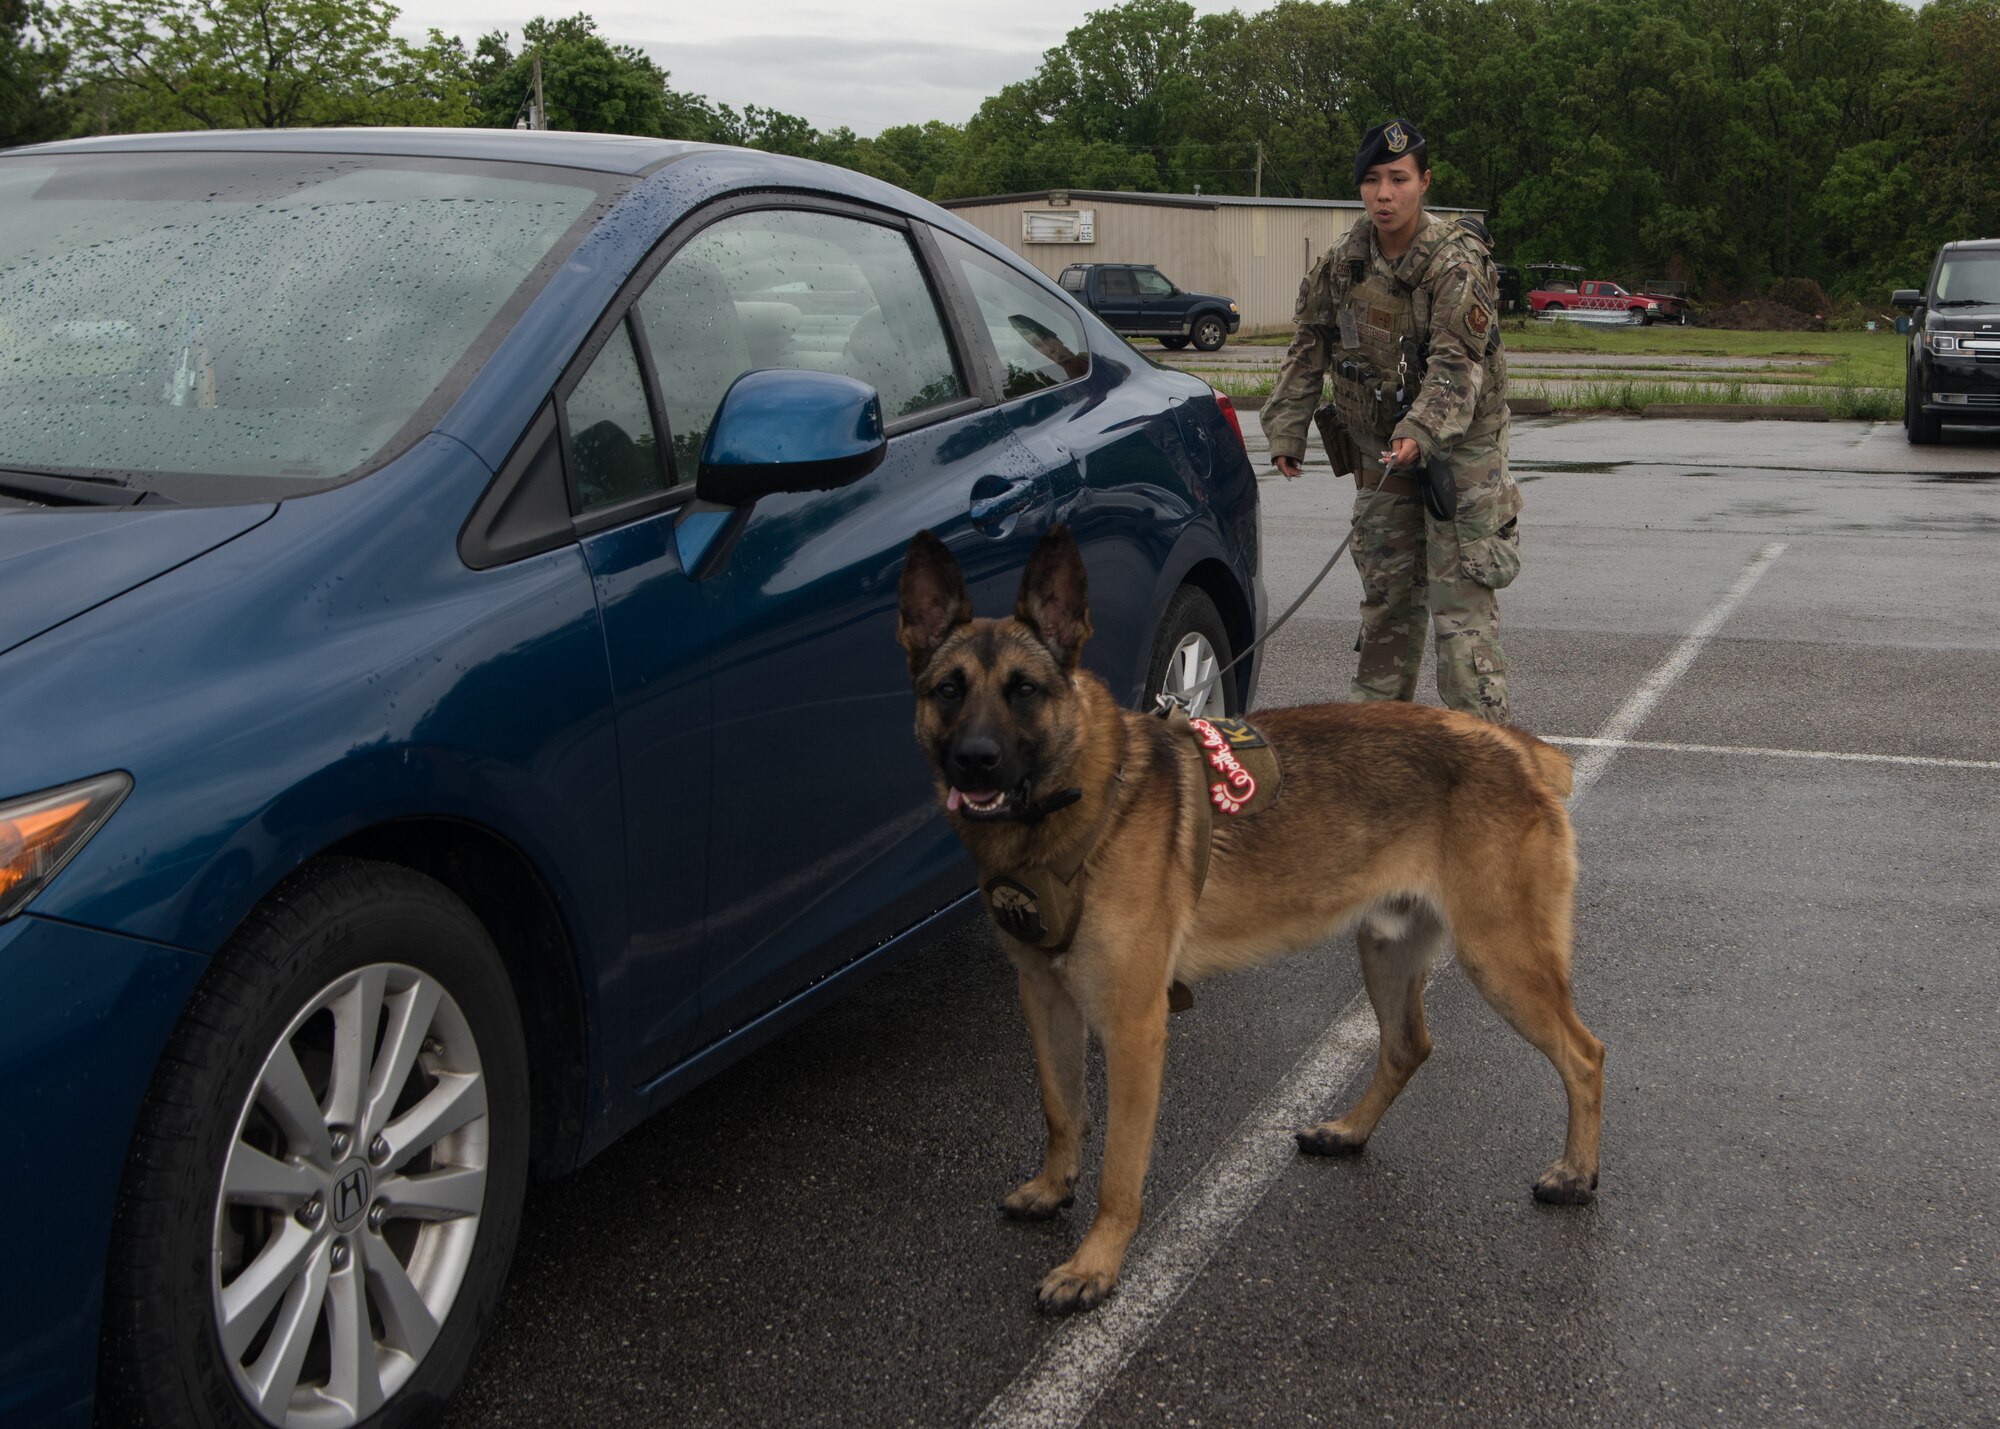 A military working dog team checks cars for anything suspicious.